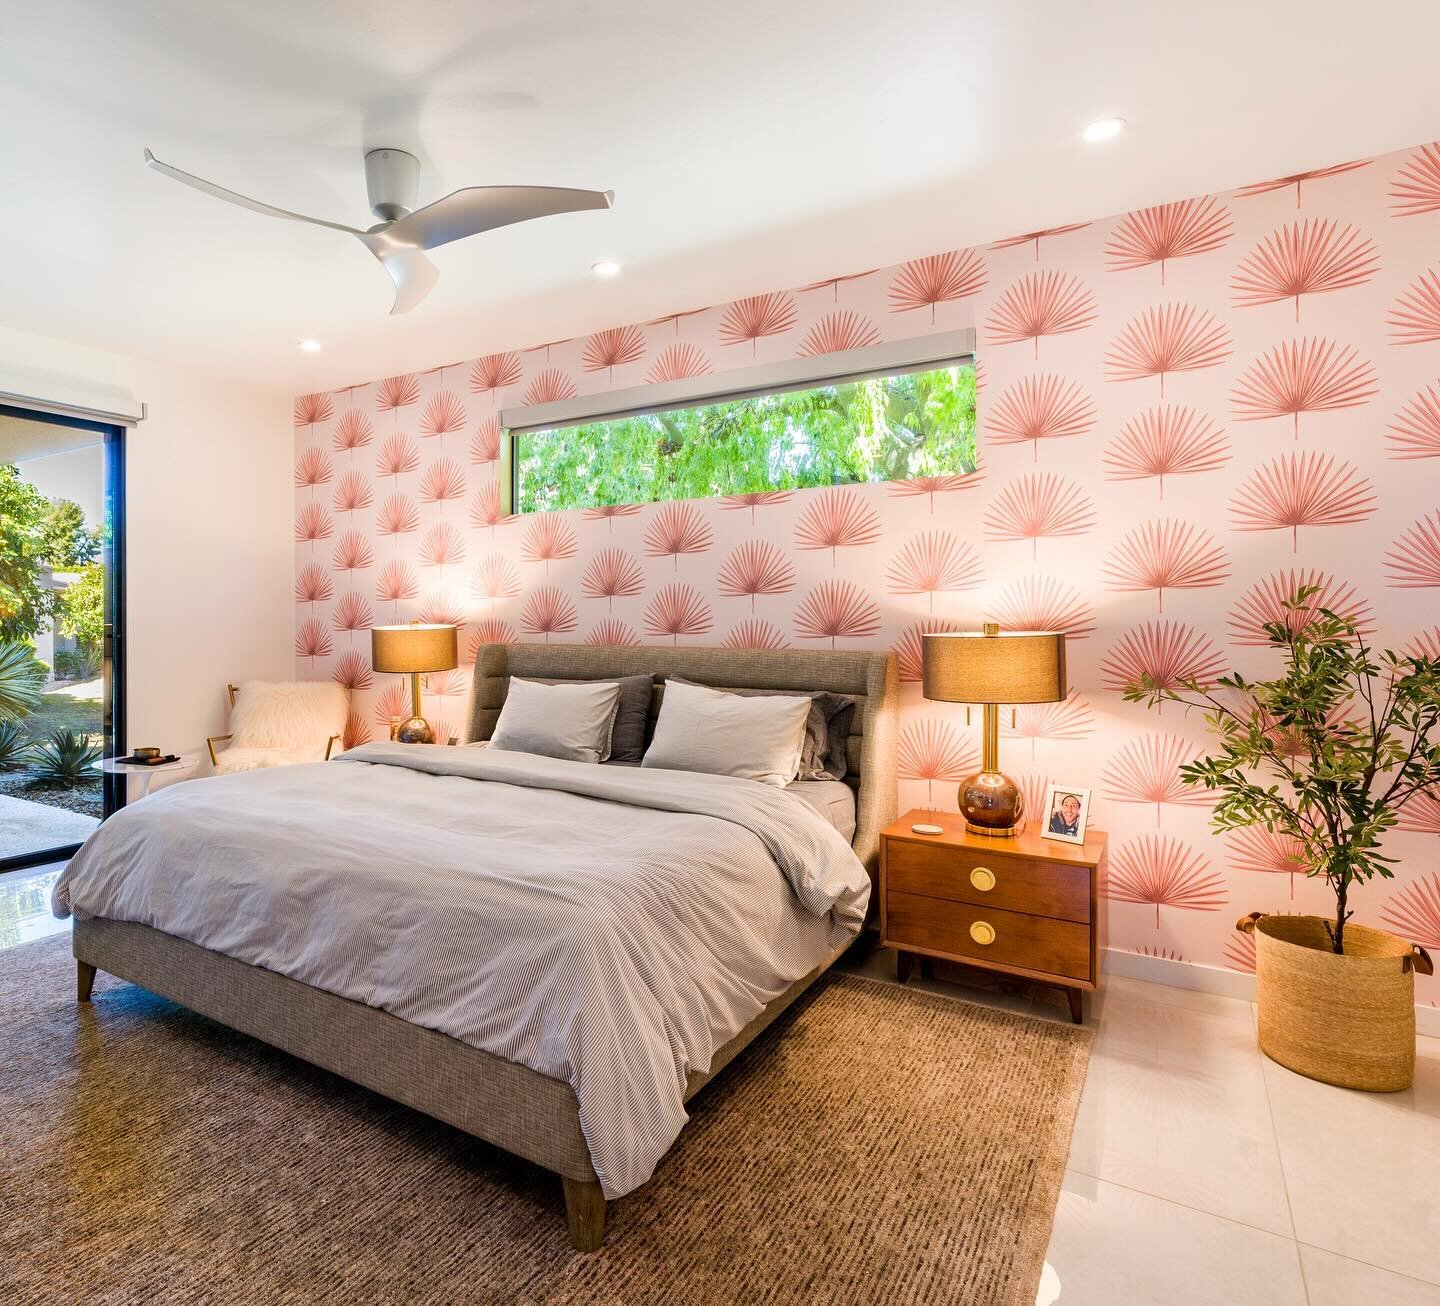 A palm frond inspired wallpaper design provides some fun and focus for this master bedroom. 🌴
Check out the rest of our Palm Springs contemporary style &rsquo;Cosmopolitan Colorburst&rsquo; design project now on our website at DesertSociety.net 🙌🏼